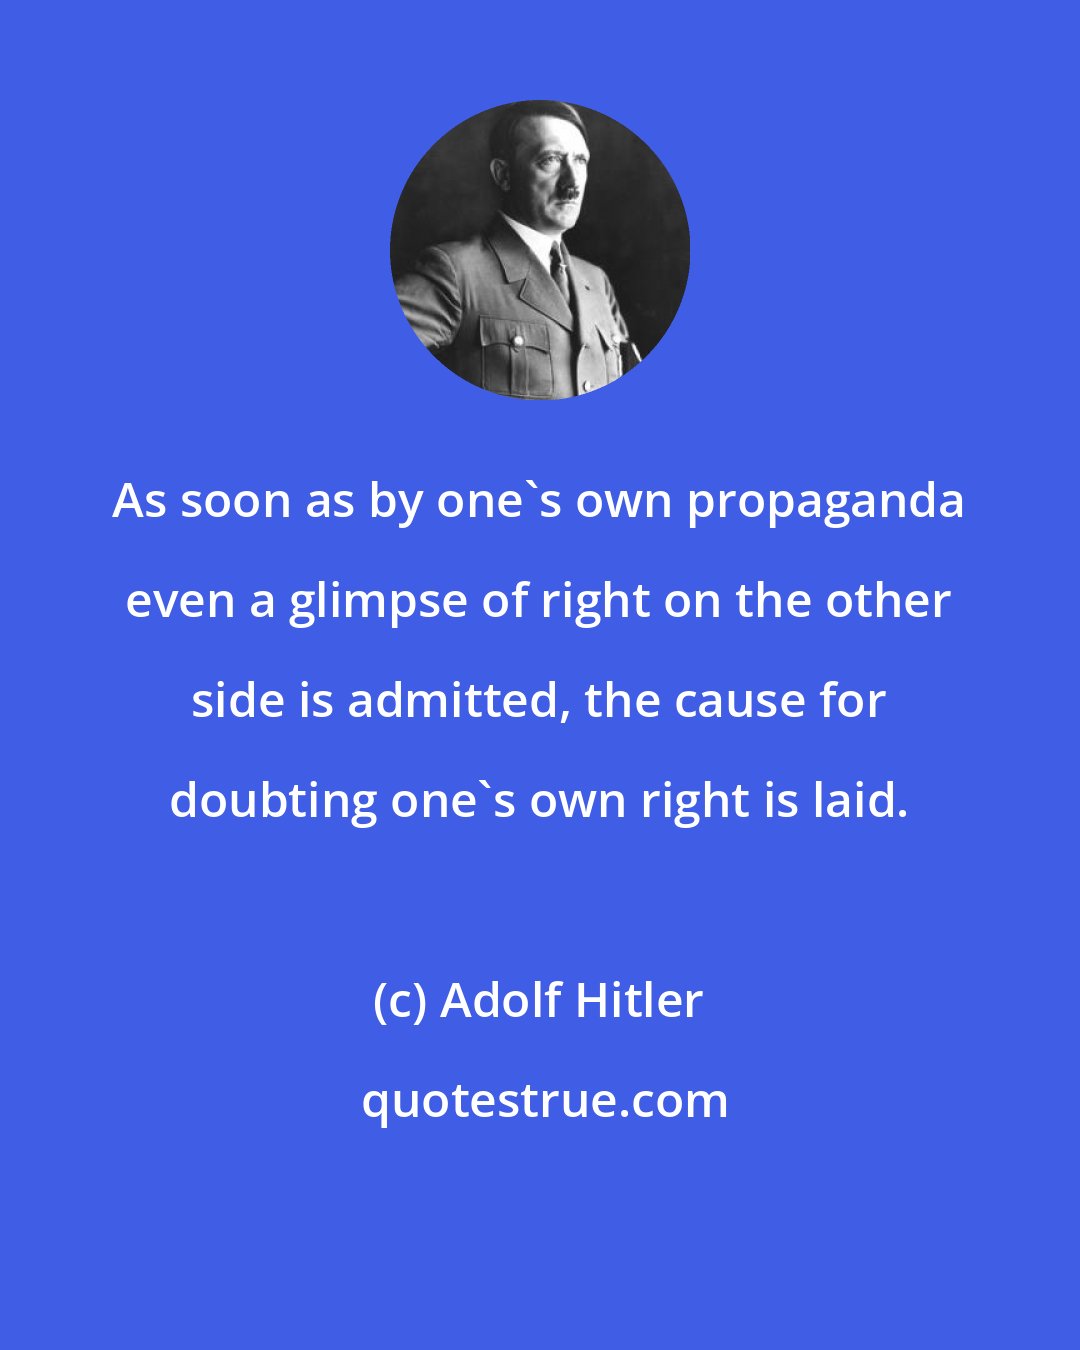 Adolf Hitler: As soon as by one's own propaganda even a glimpse of right on the other side is admitted, the cause for doubting one's own right is laid.